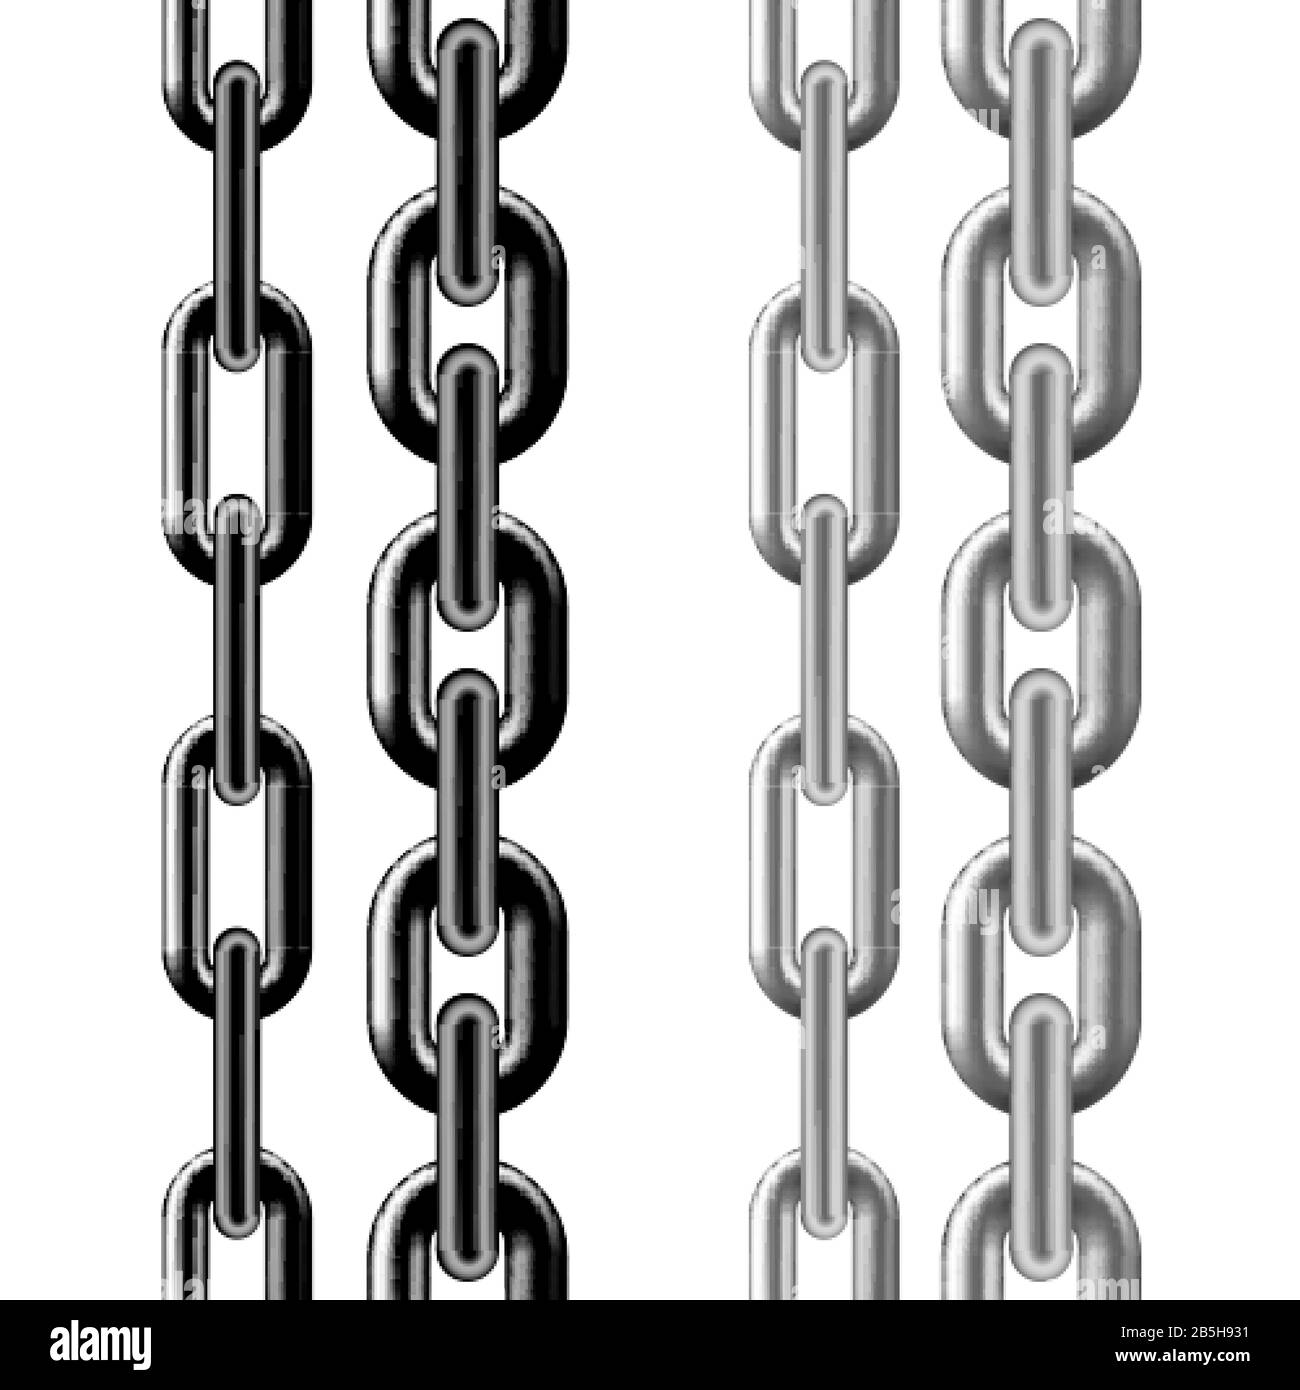 Seamless chain pattern. Black and silver metallic chain texture. vector illustration isolated on white background Stock Vector